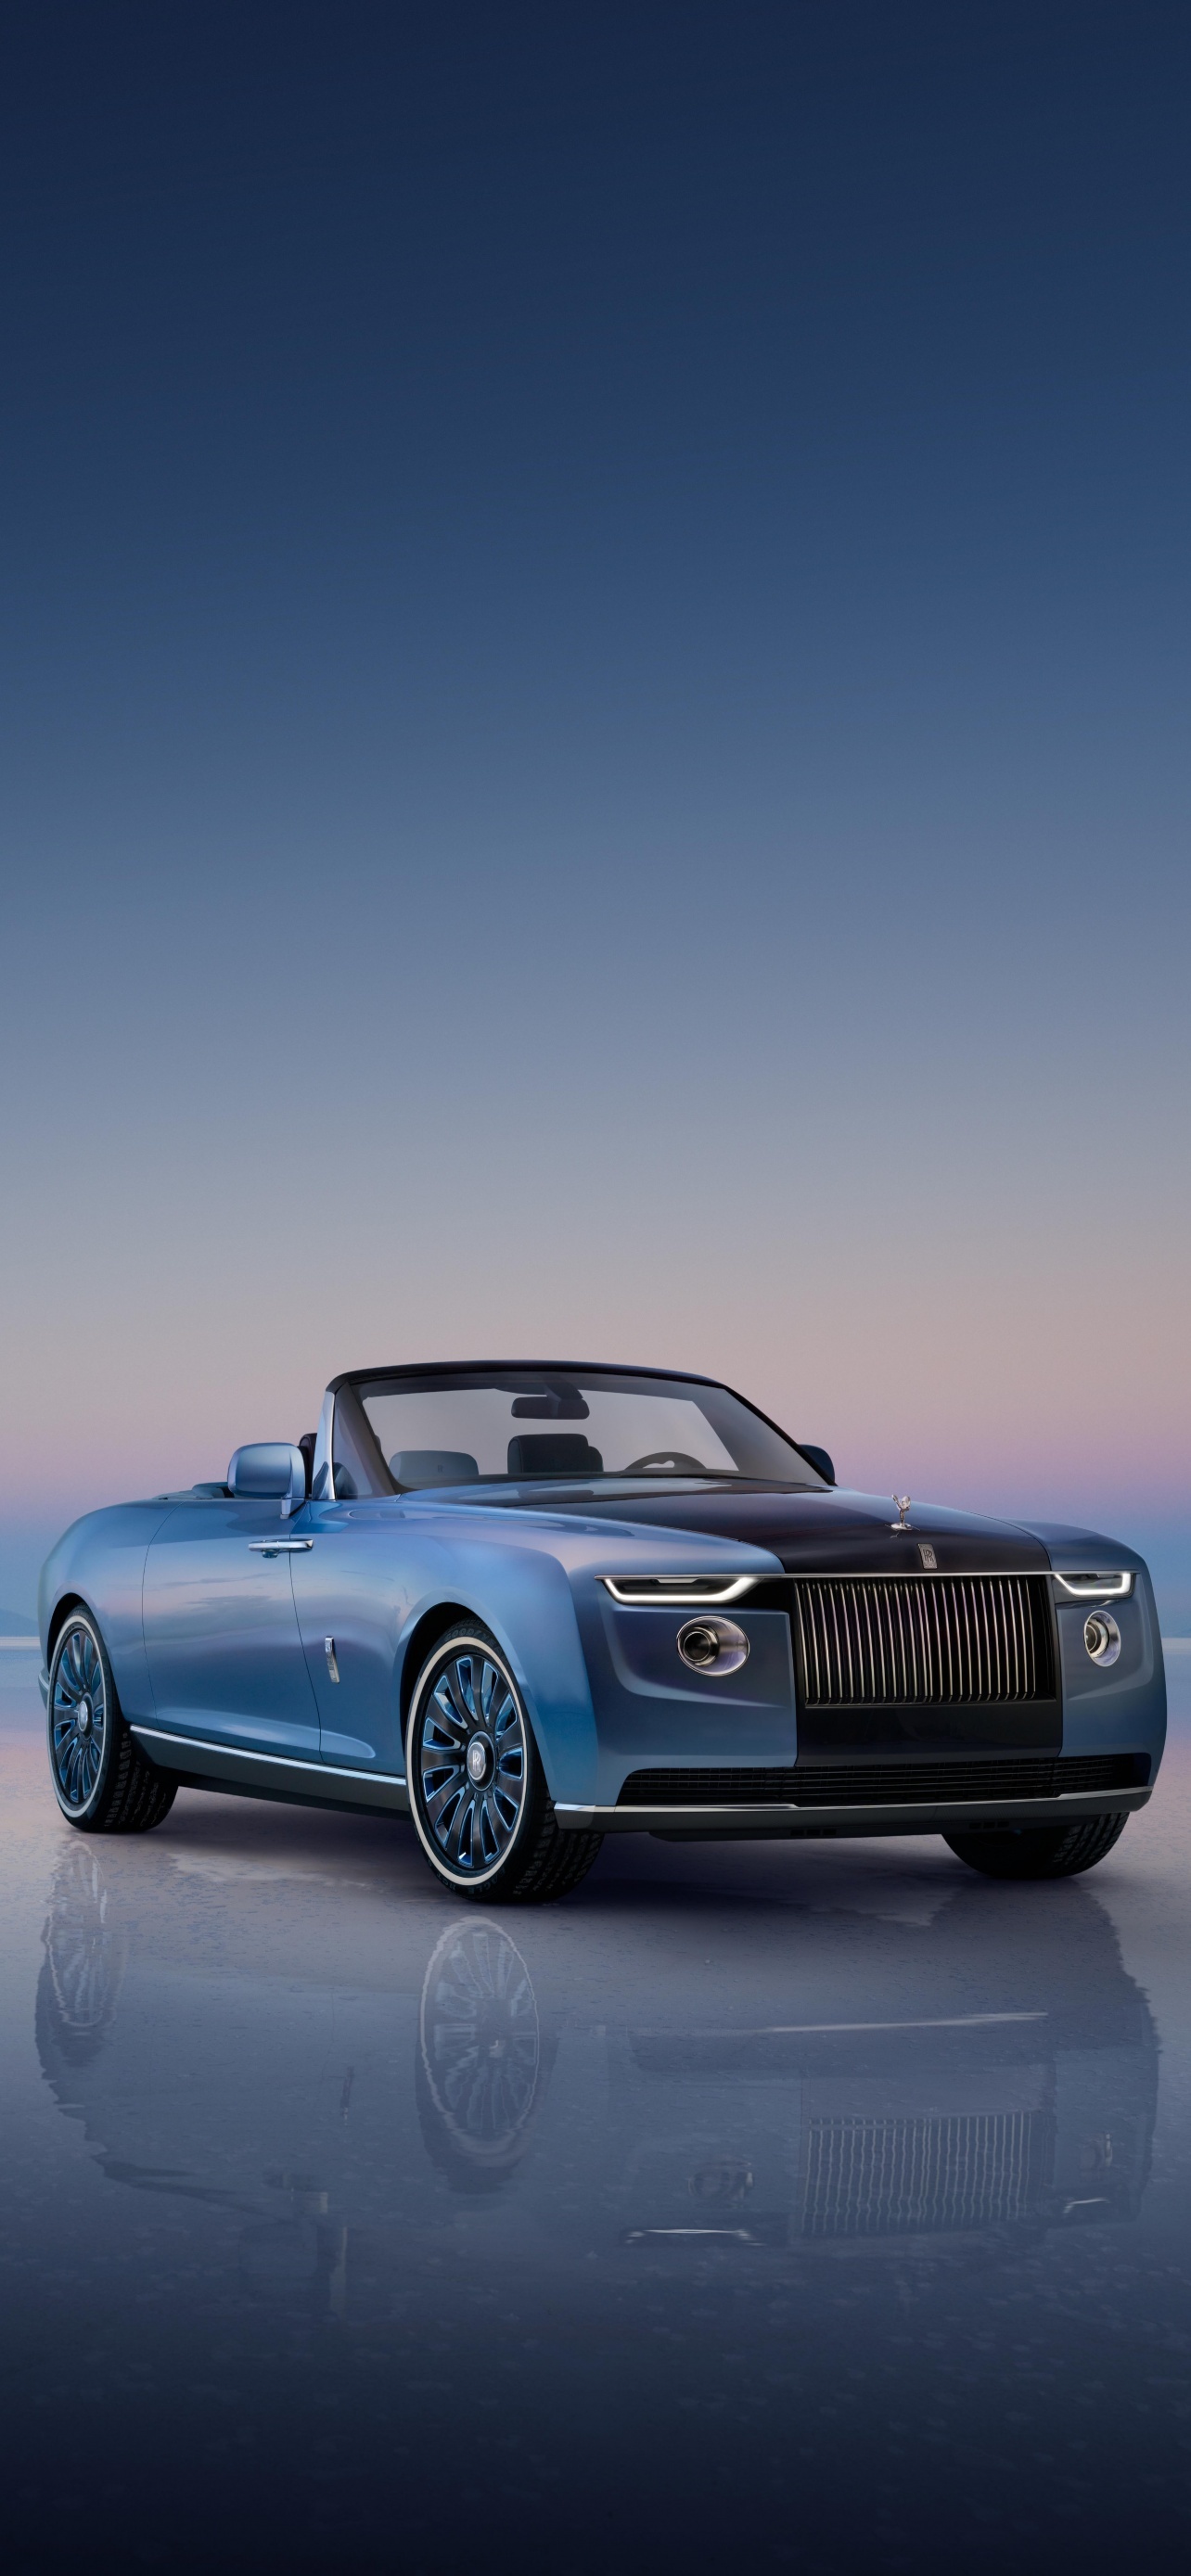 Rolls-Royce Dawn, Boat tail beauty, World's most expensive cars, 5K and 8K wallpapers, 1290x2780 HD Phone